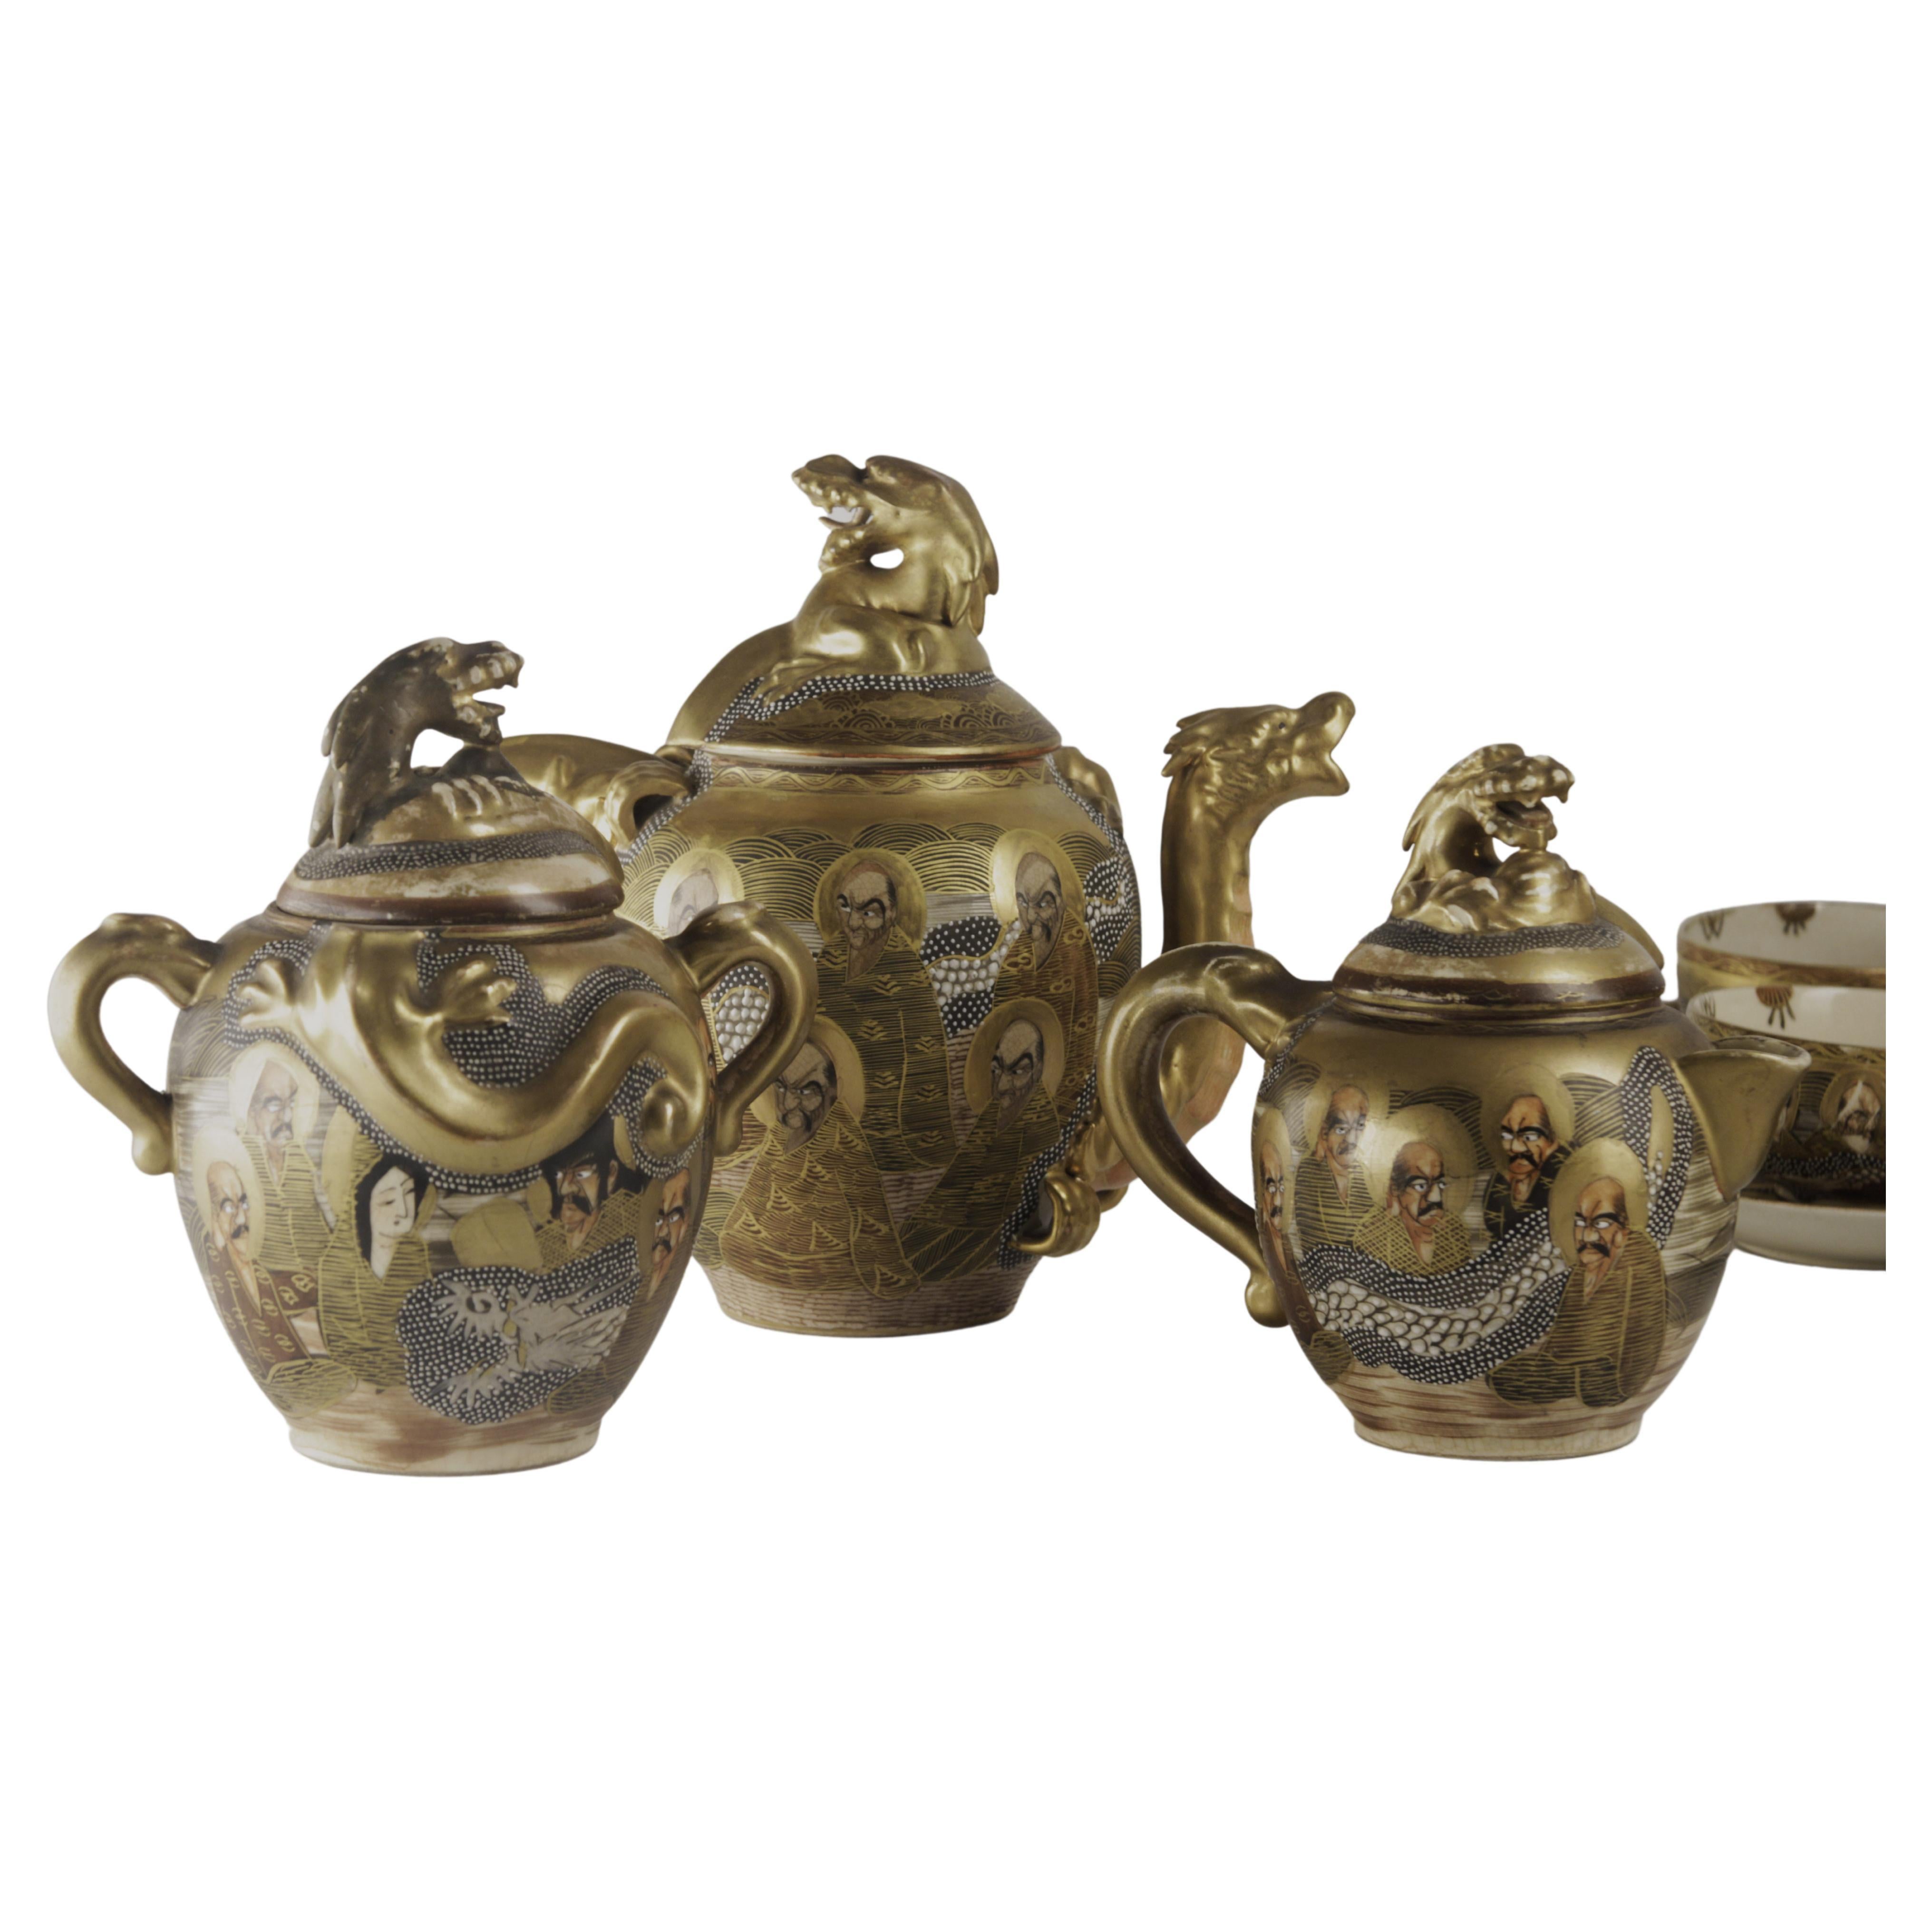 Tea service Santsuma set
Japanese game
Immortals Style (Dragon Ware)
Hand painted
Japanese Origin Circa 1900
porcelain material
Very good condition (some natural wear and gold wear on its lid)
The set includes: Teapot 25 cm high, 25 cm wide,